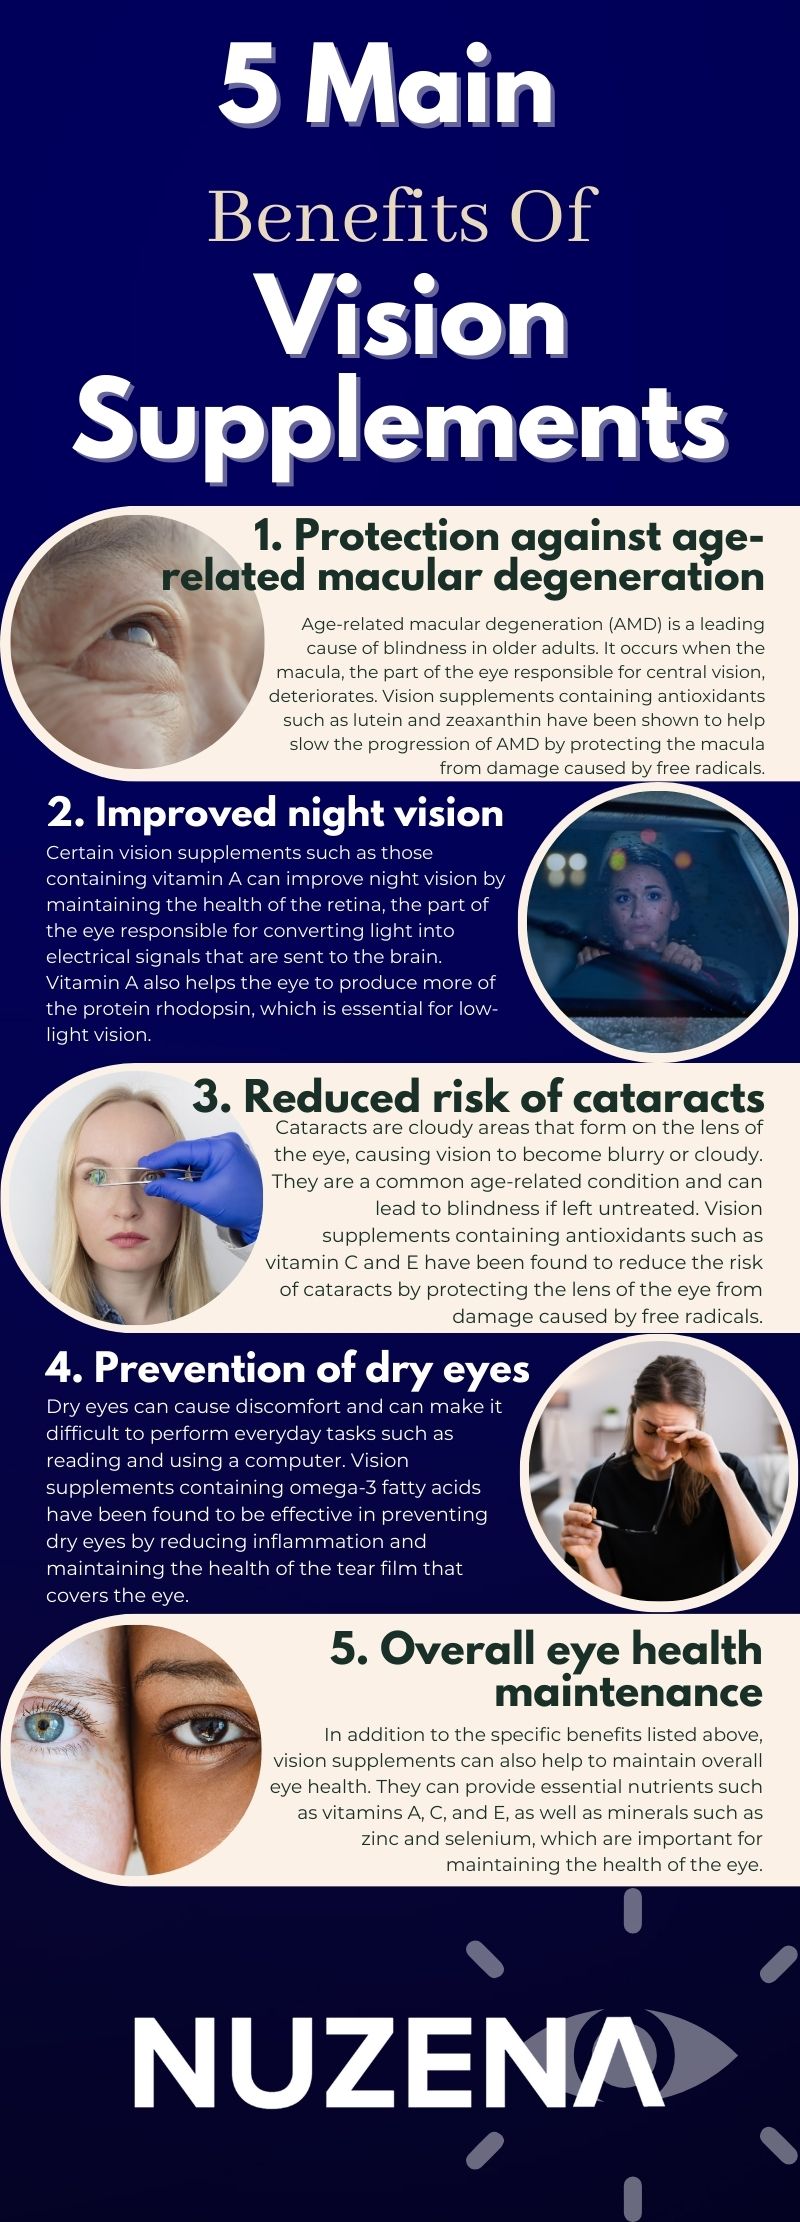 5 main benefits of vision supplements